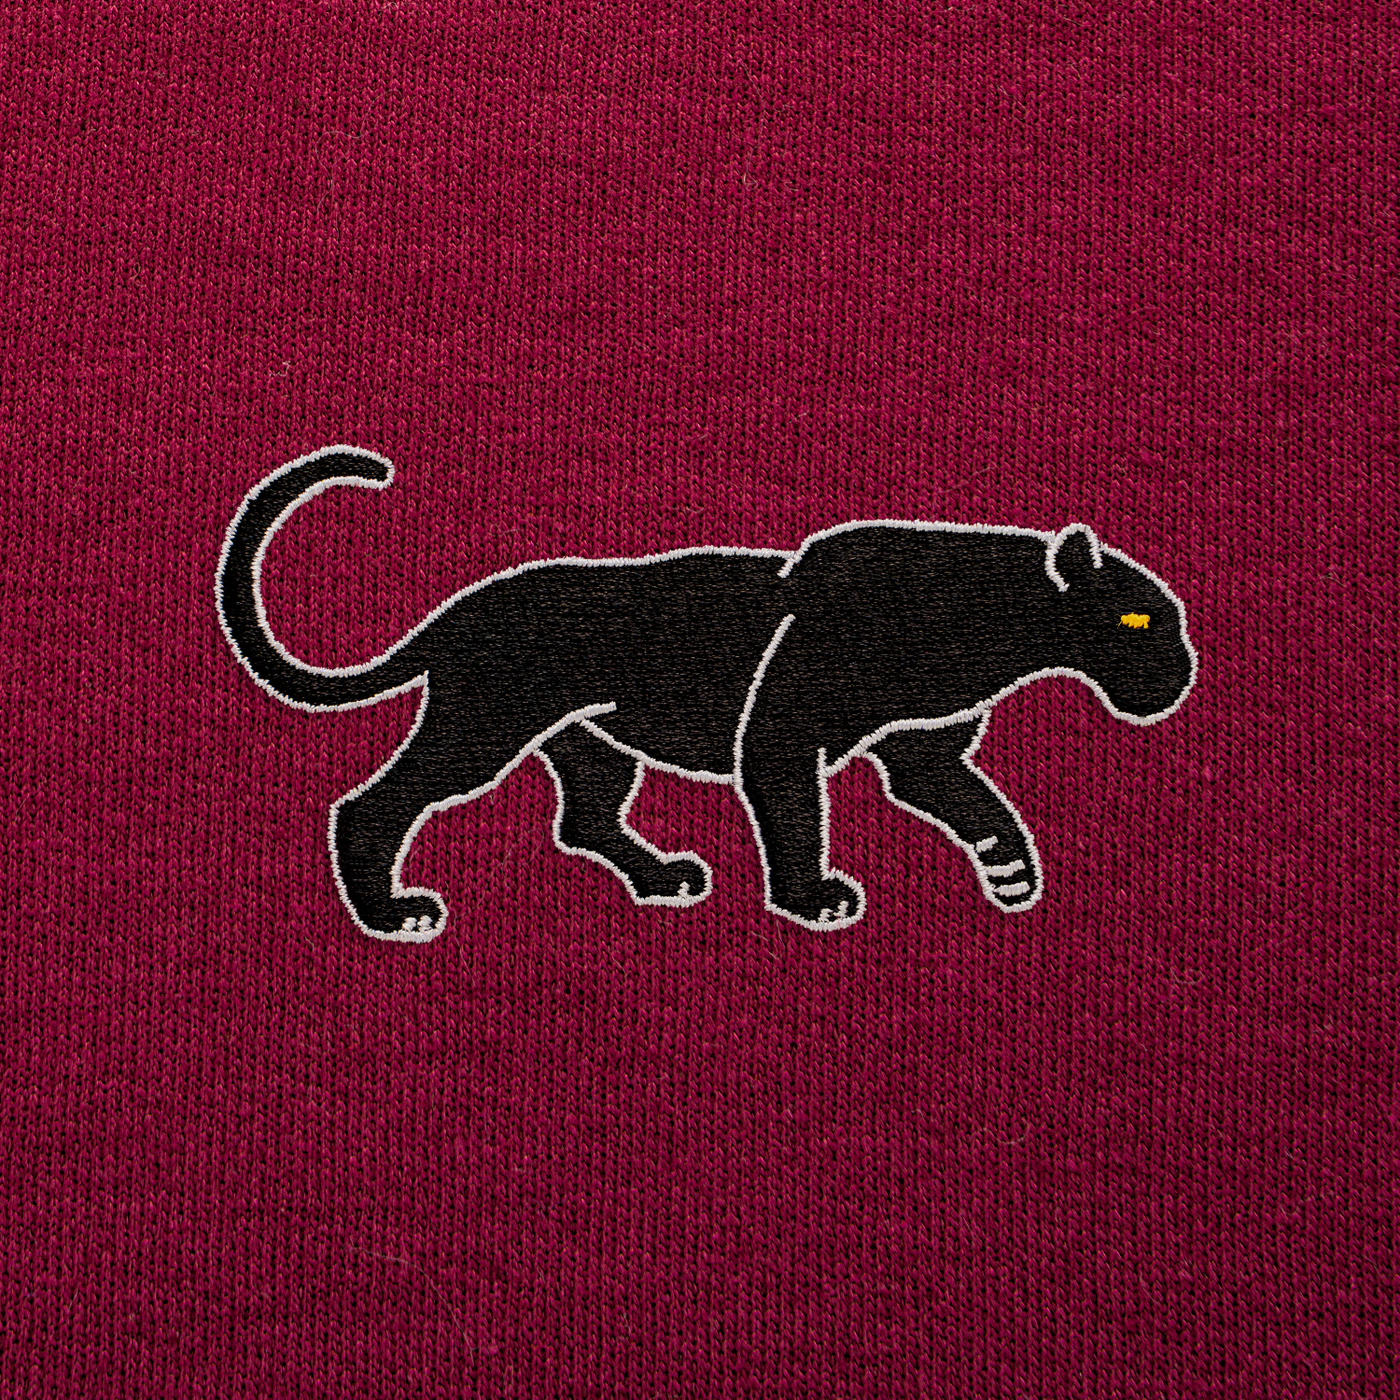 Bobby's Planet Men's Embroidered Black Jaguar Sweatshirt from South American Amazon Animals Collection in Maroon Color#color_maroon